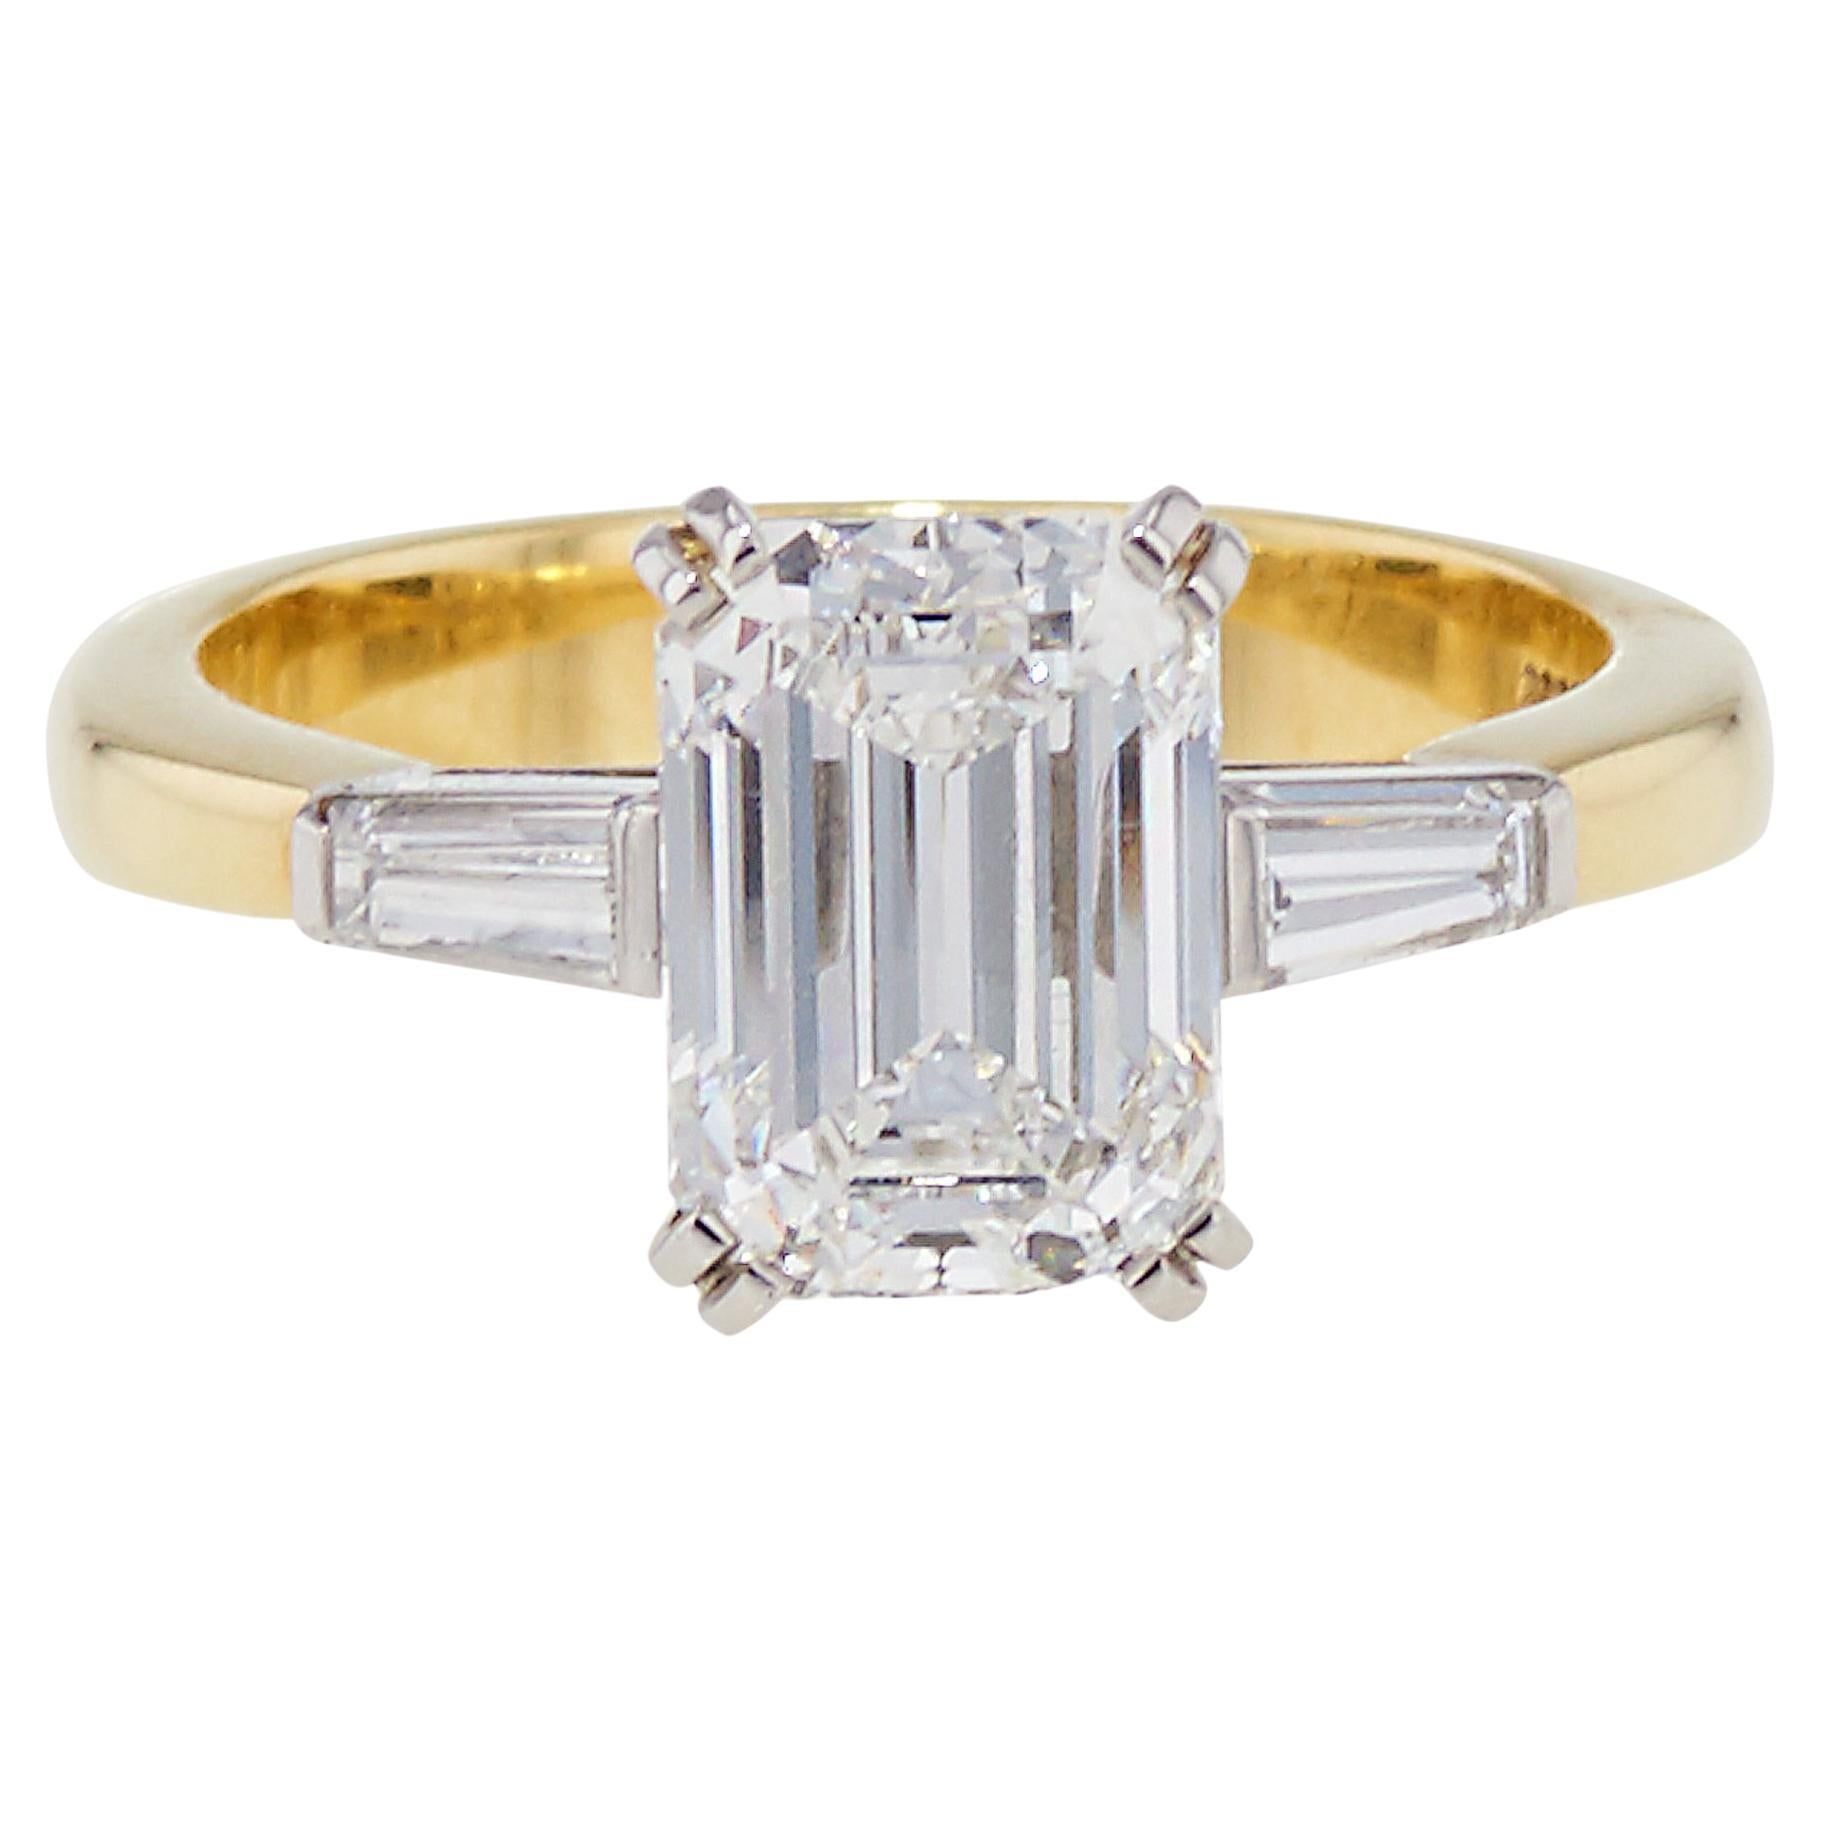 Tiffany & Co. circa 1990 Yellow Gold and Platinum Emerald Cut Diamond Ring For Sale